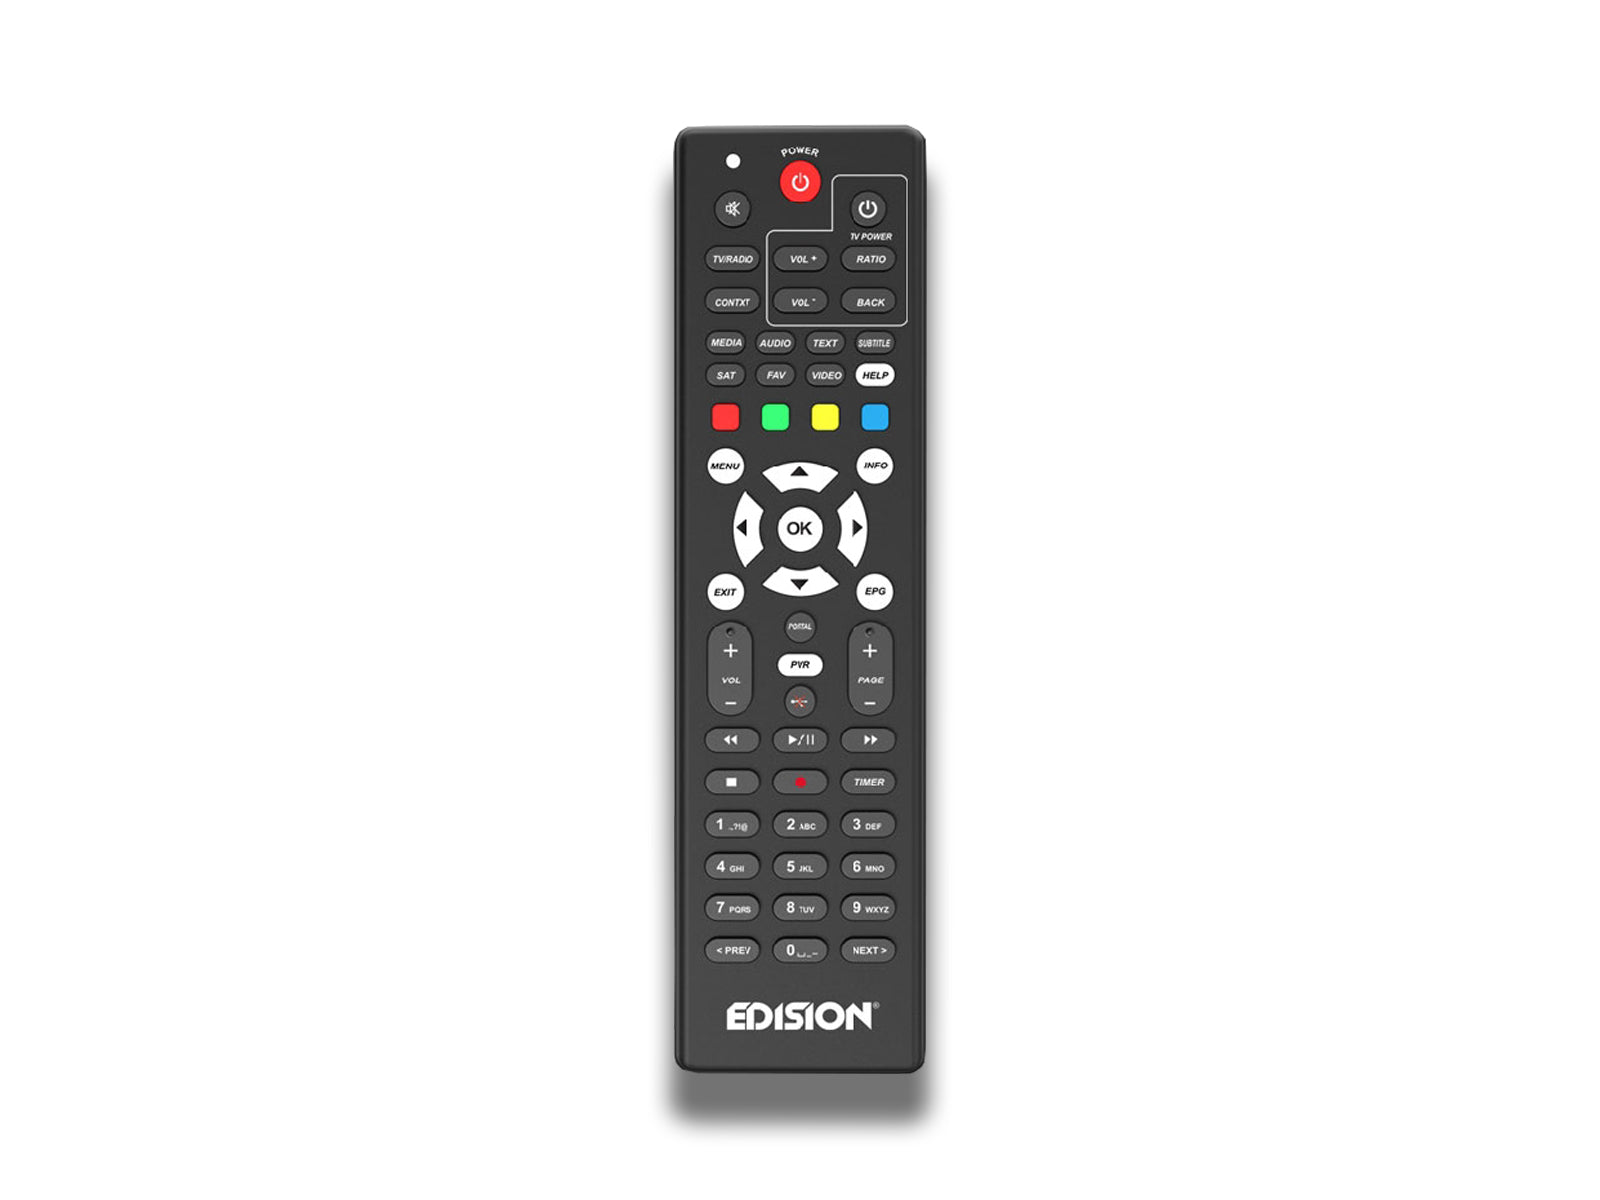 Image shows the remote control of the Edision OS NINO+ DVB-S2 Linux Receiver